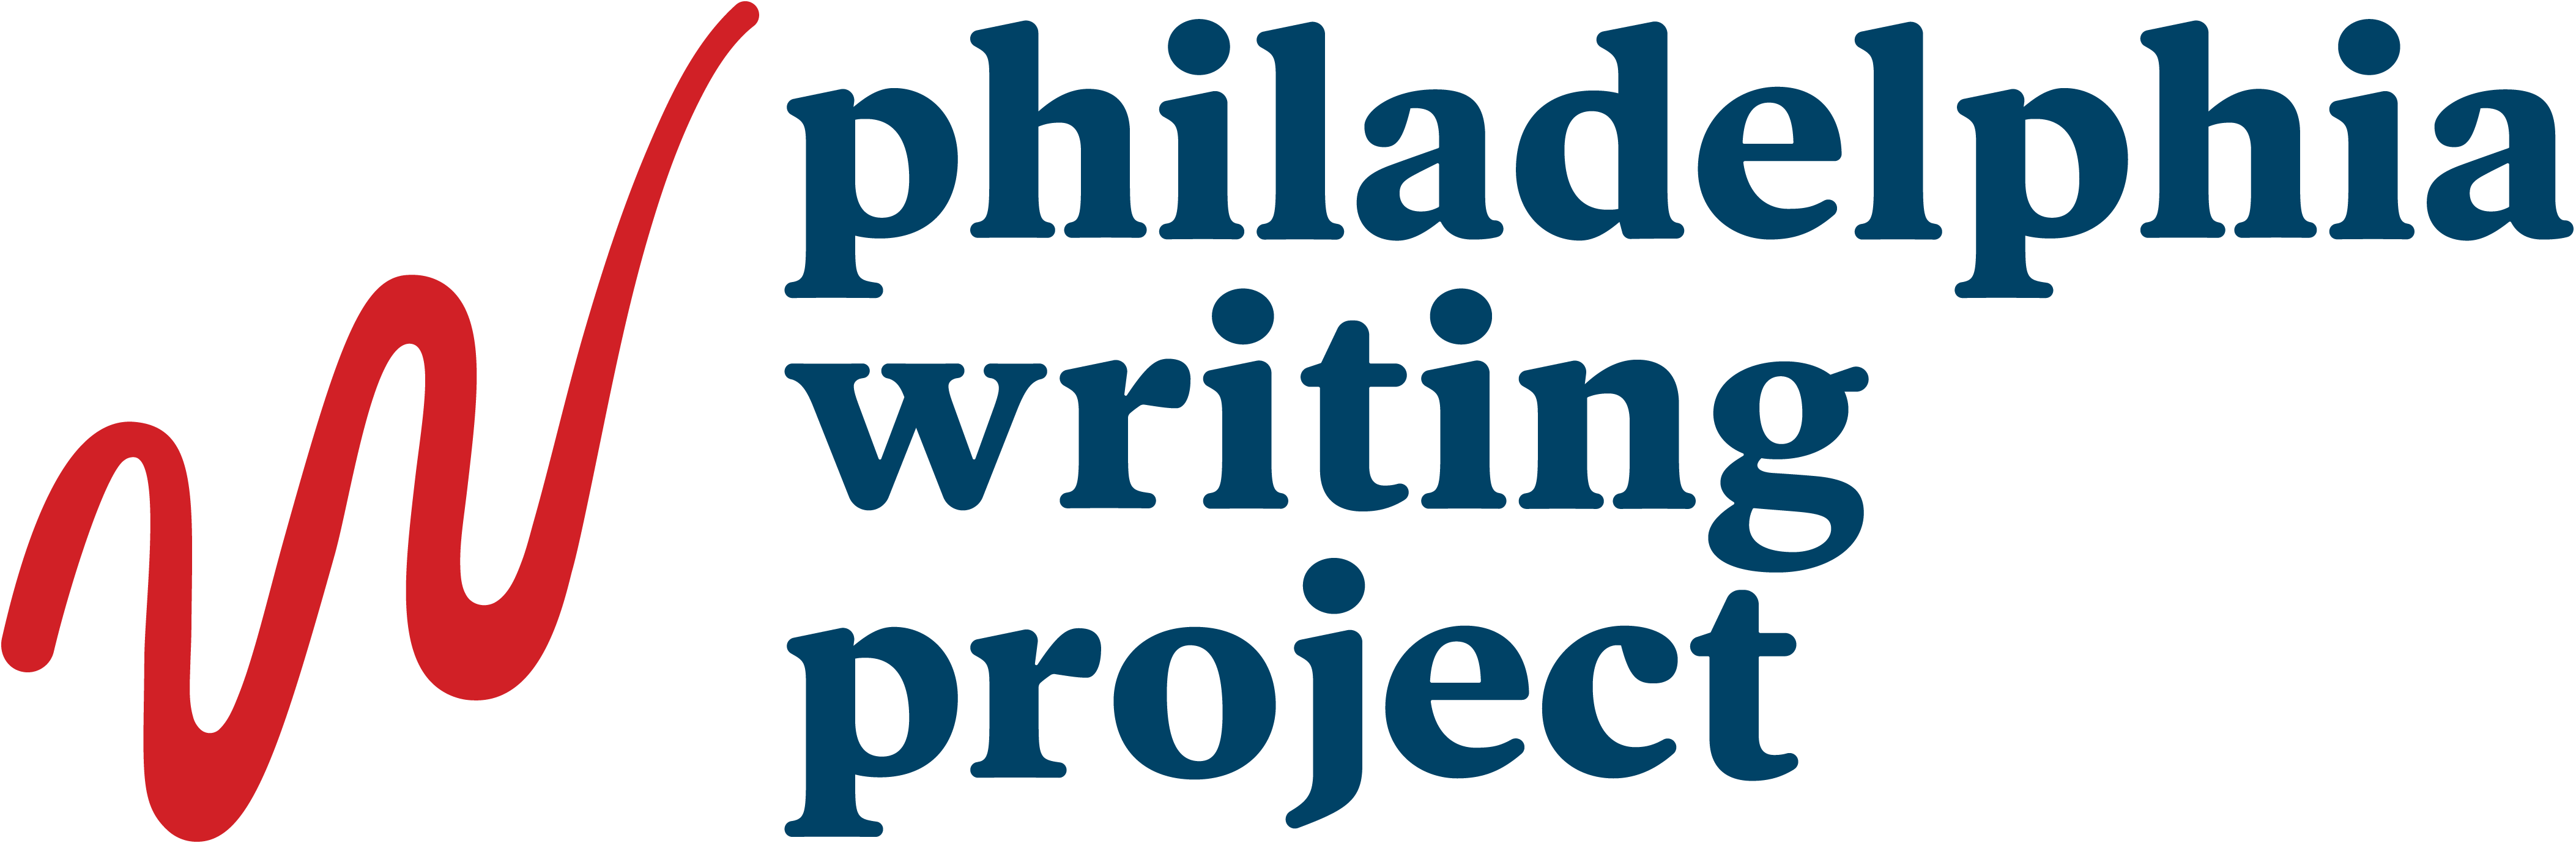 Philadelphia Writing Project logo featuring organization name in blue and stylistic "W" in red on the left side.